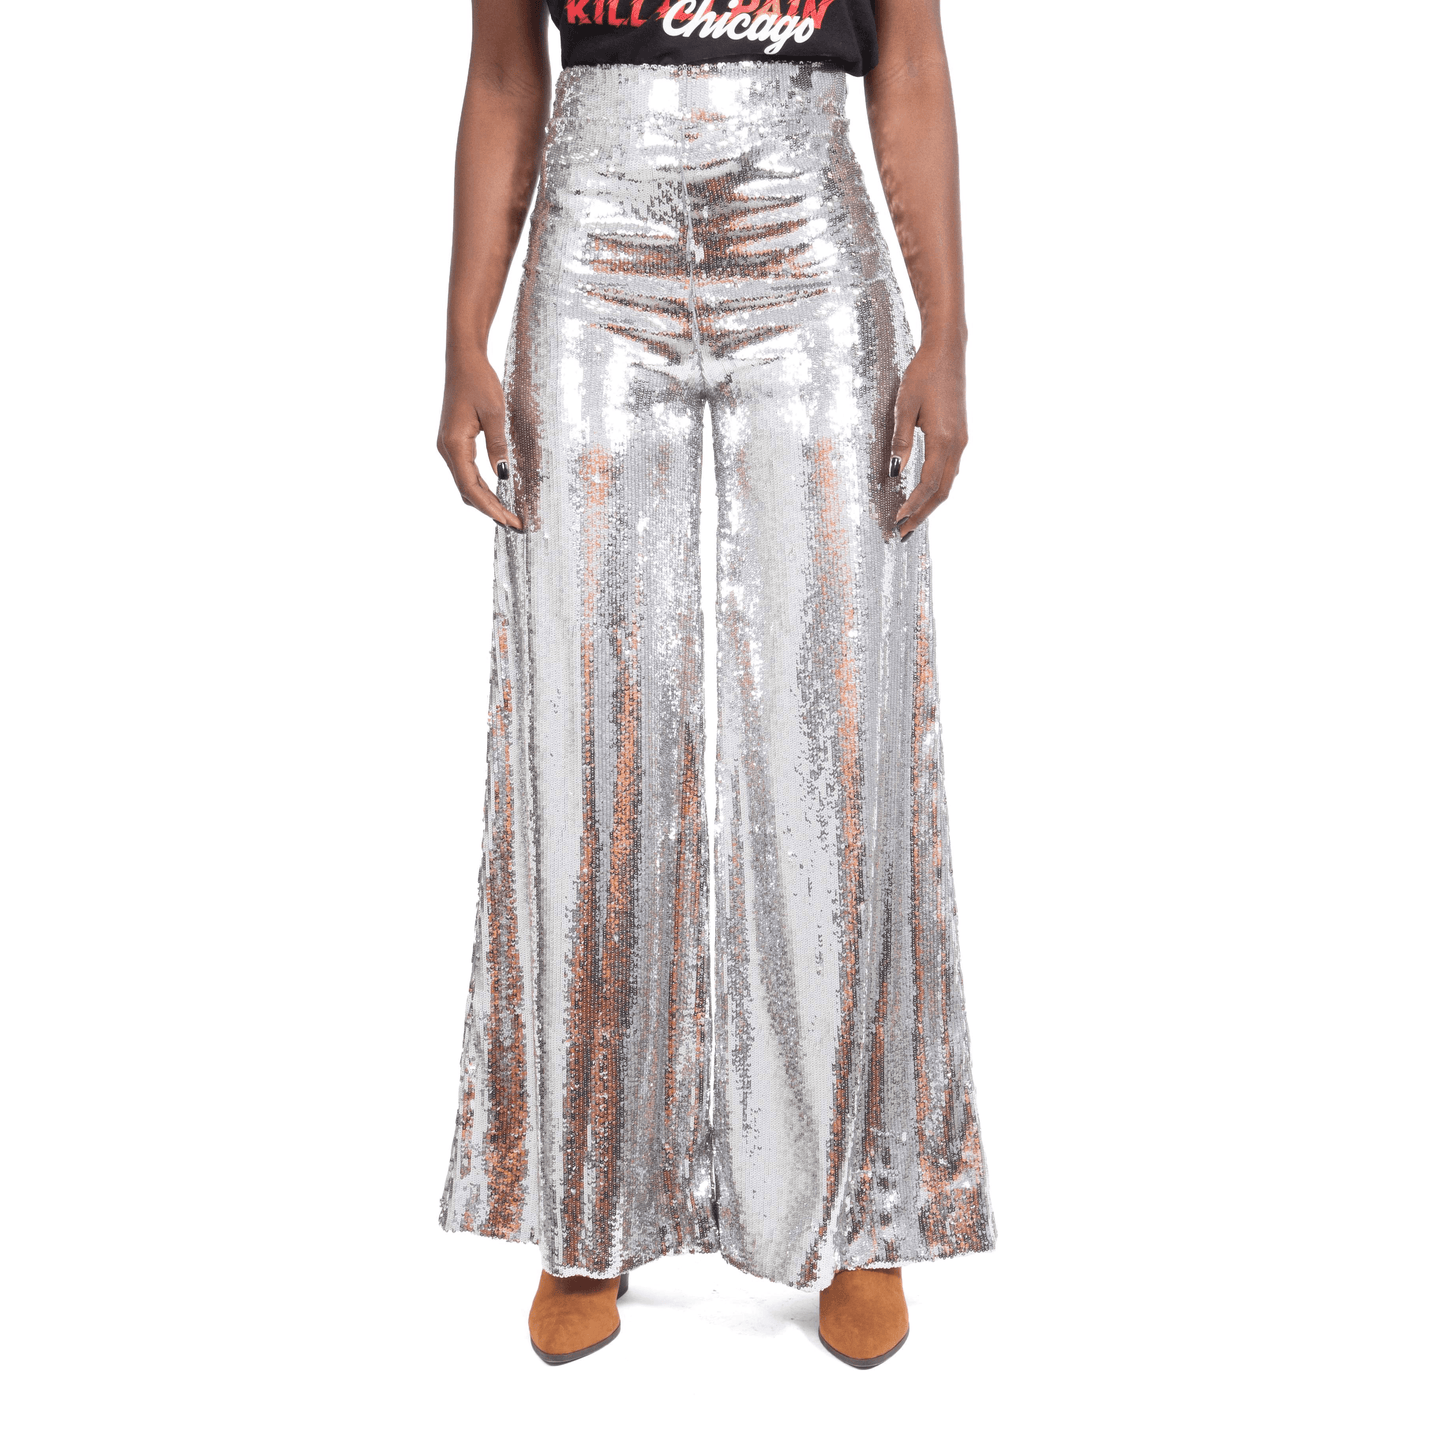 GLIMPSE OF MAGIC RELAXED METALLIC PANT in SILVER